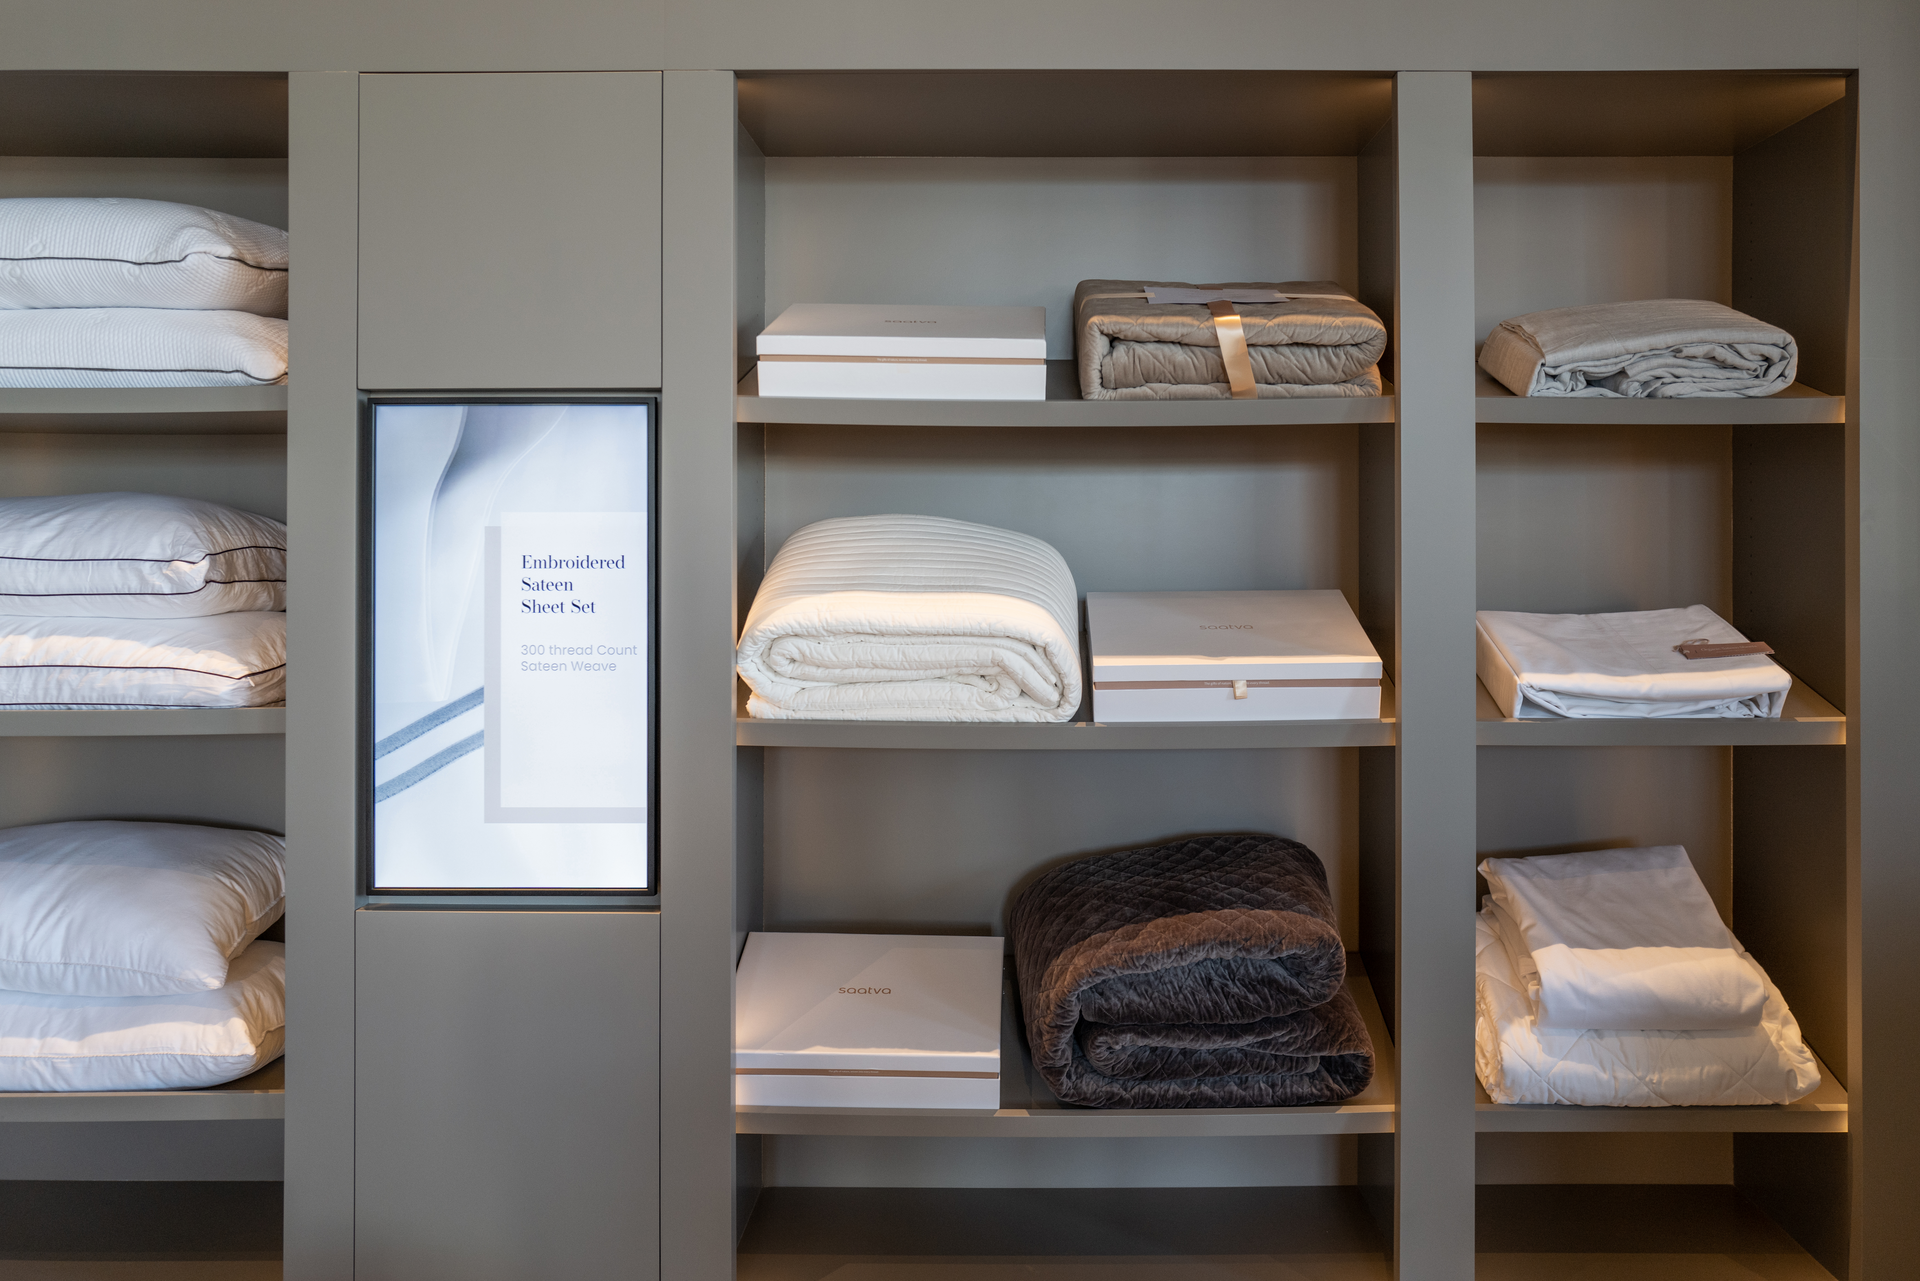 The Saatva Los Angeles touch-activated Bedding and Soft Good Accessories Wall